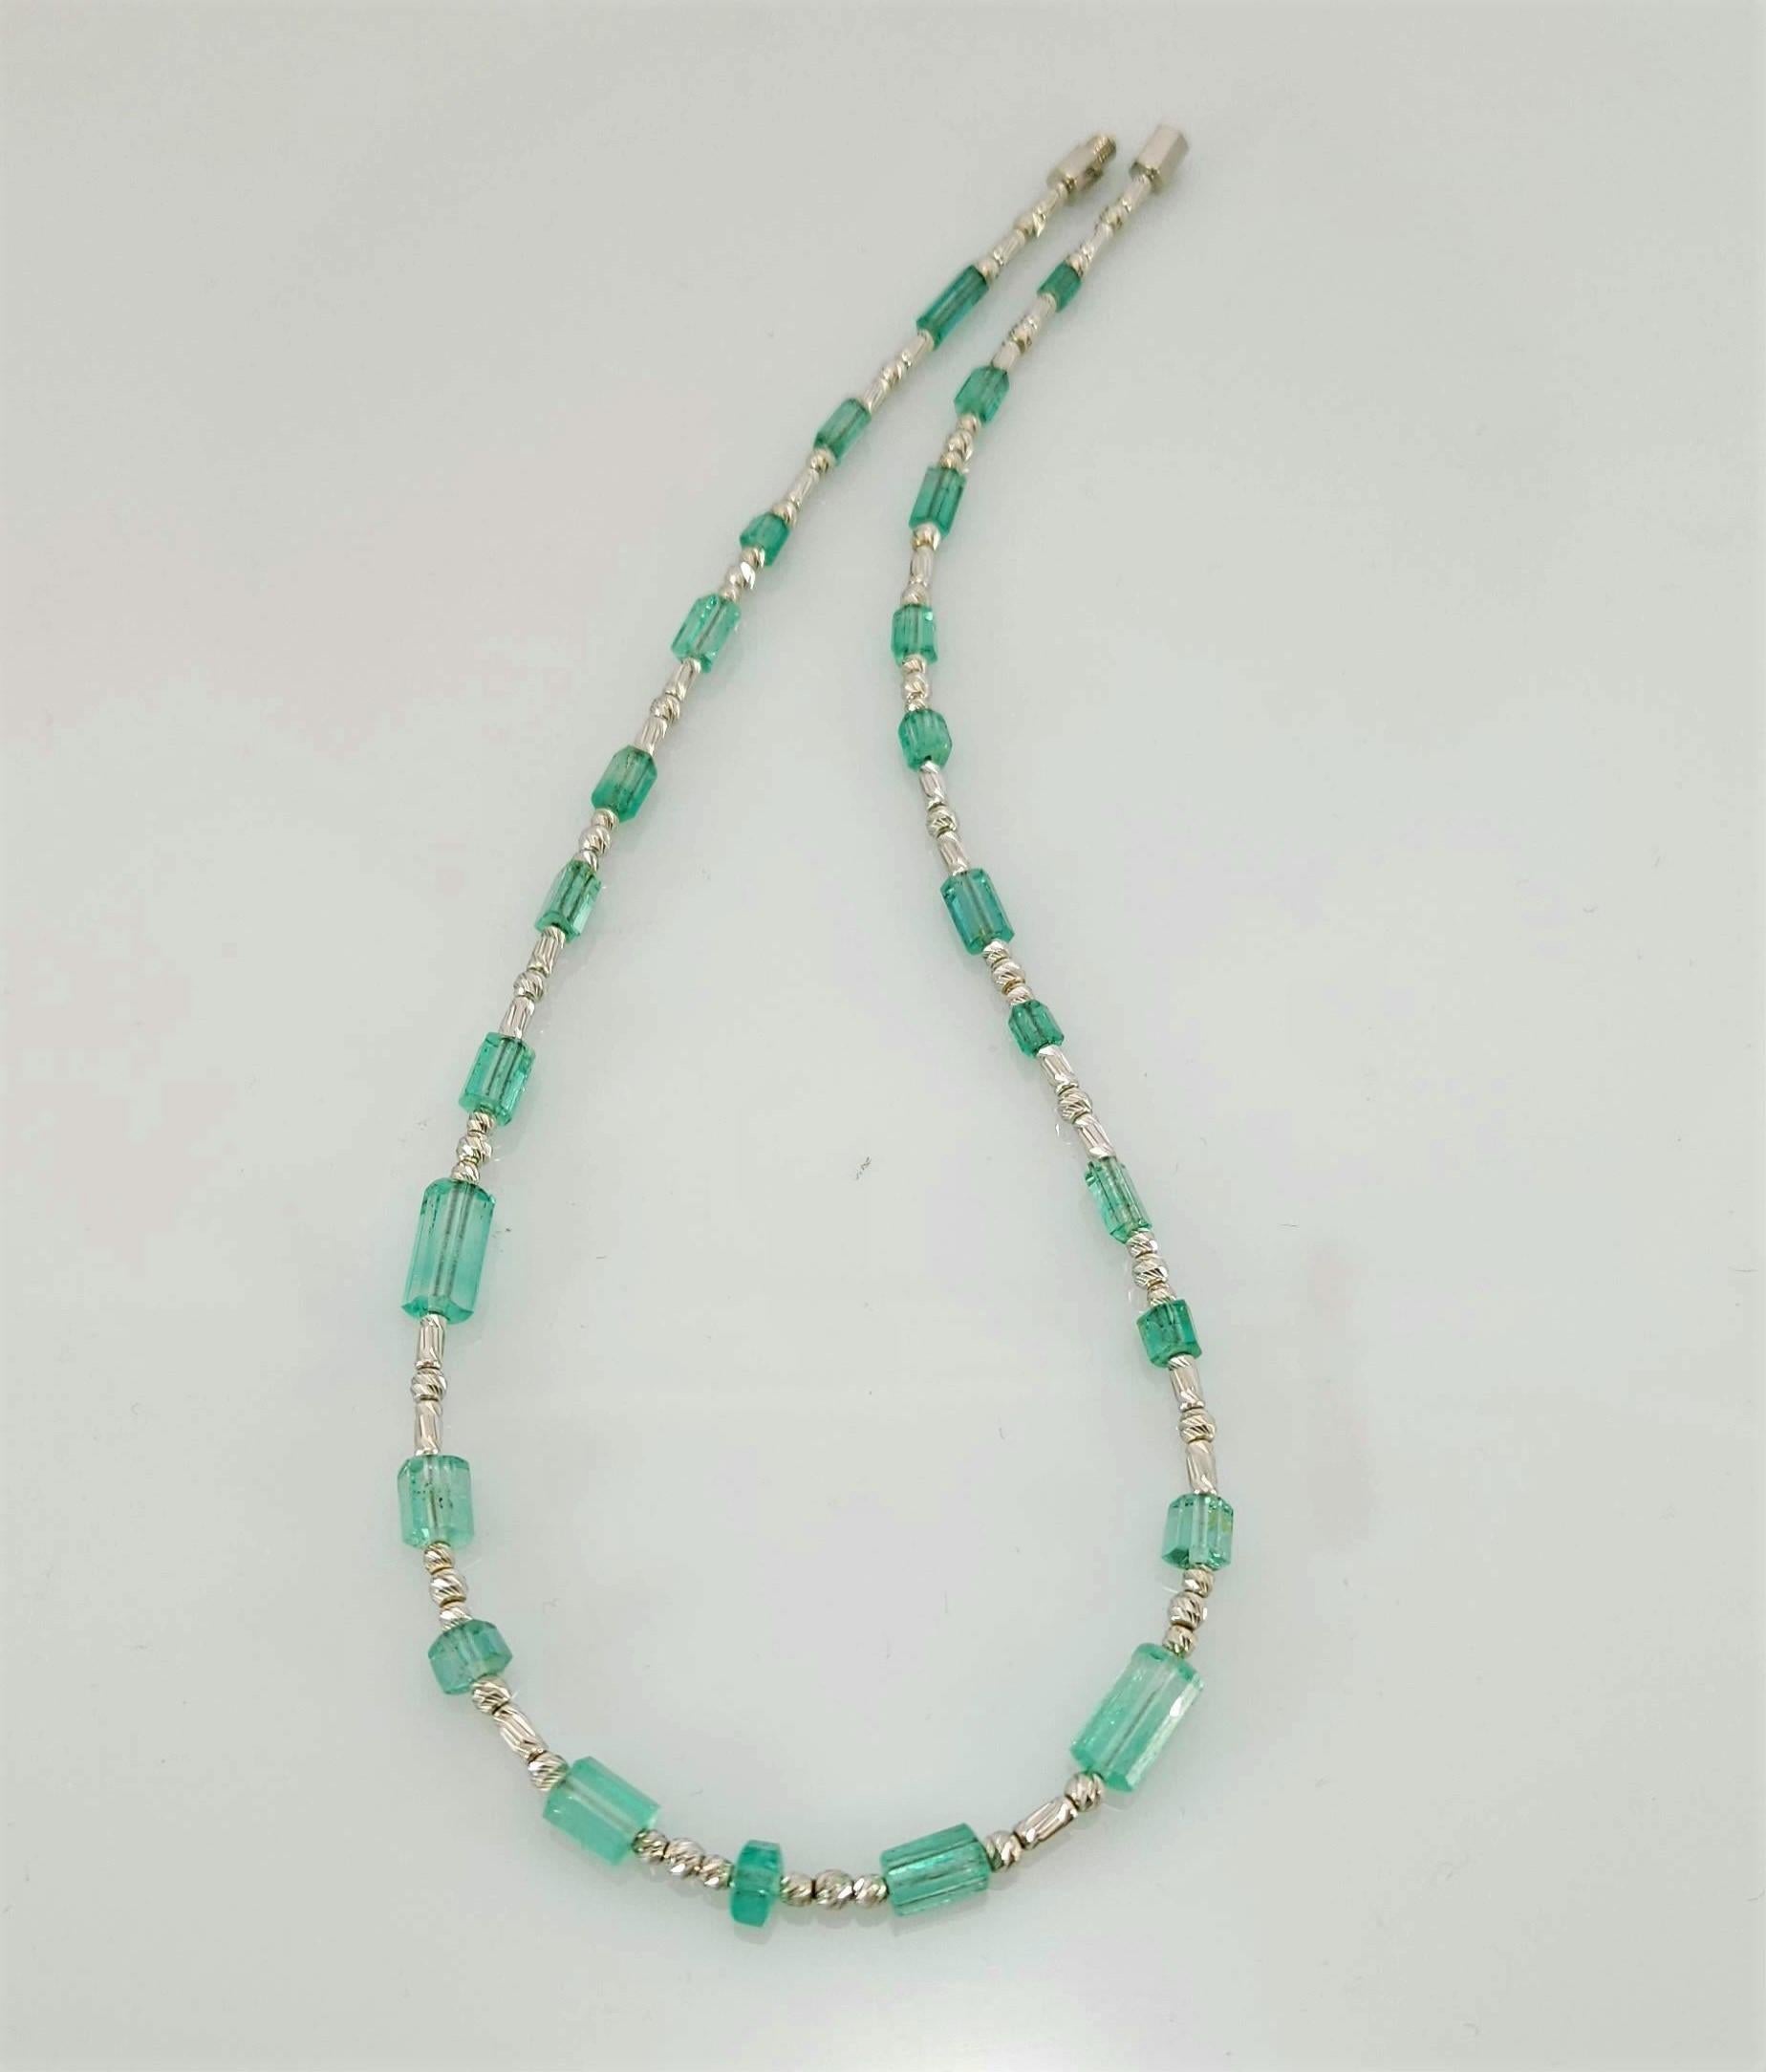 Natural Emerald Crystal Bead Necklace with 18 Carat White Gold For Sale 6